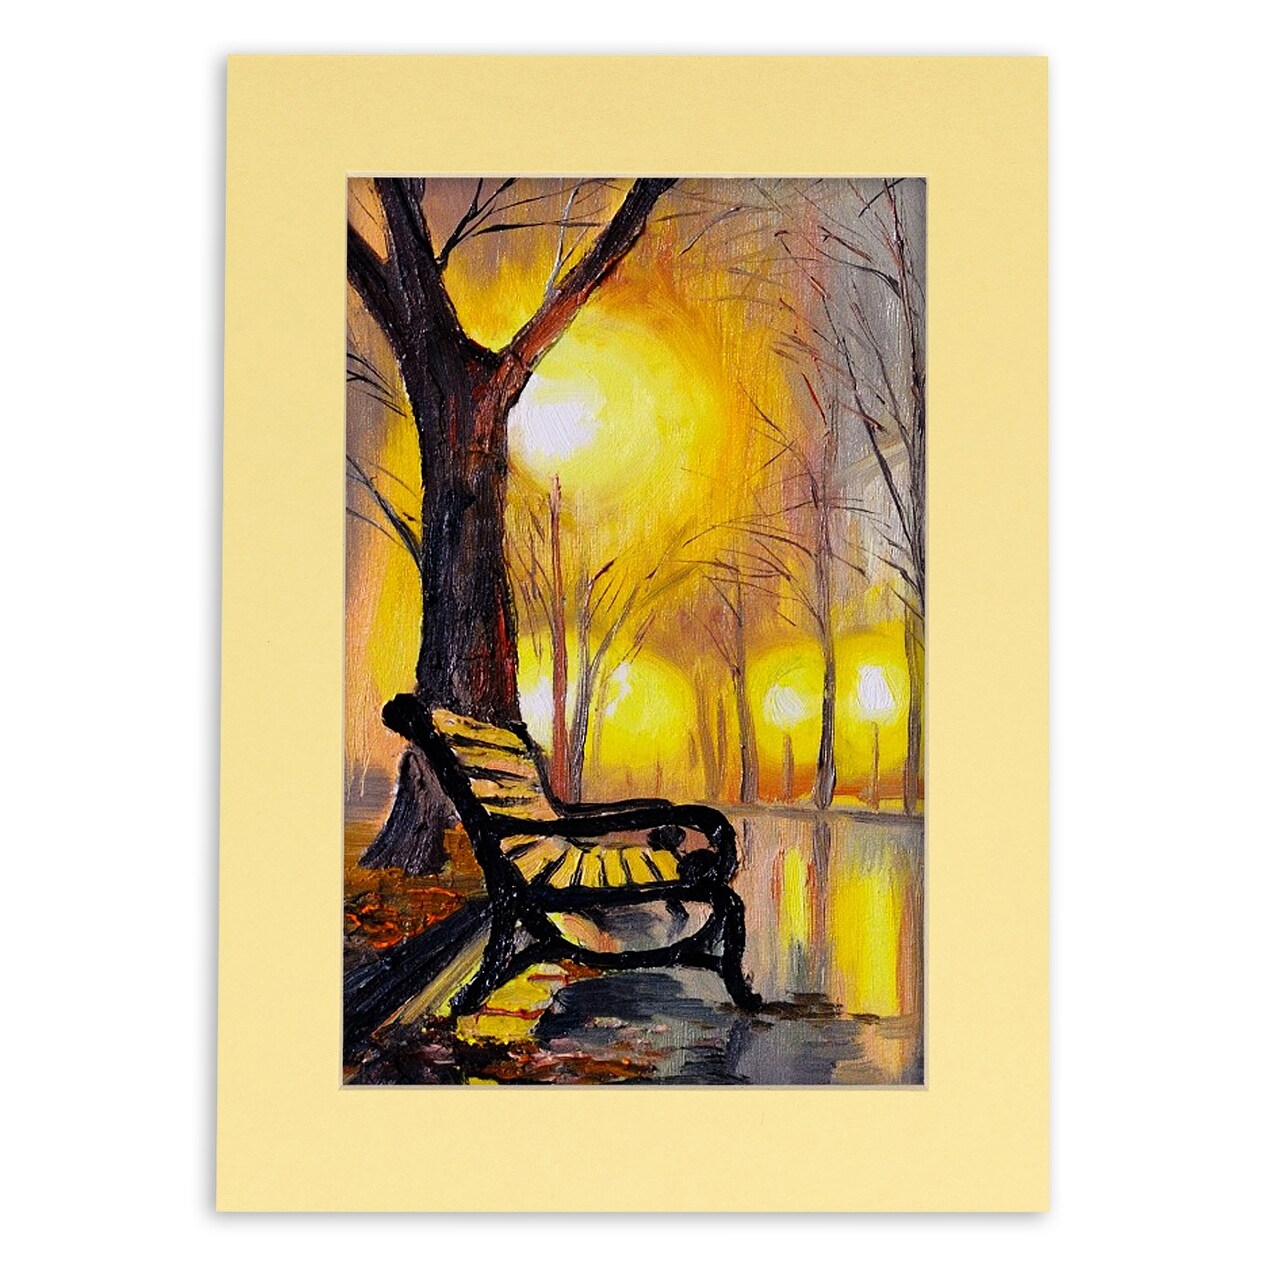 8x10 Mat for 11x14 Frame - Precut Mat Board Acid-Free Soft Yellow 8x10  Photo Matte For a 11x14 Picture Frame - On Sale - Bed Bath & Beyond -  38877104